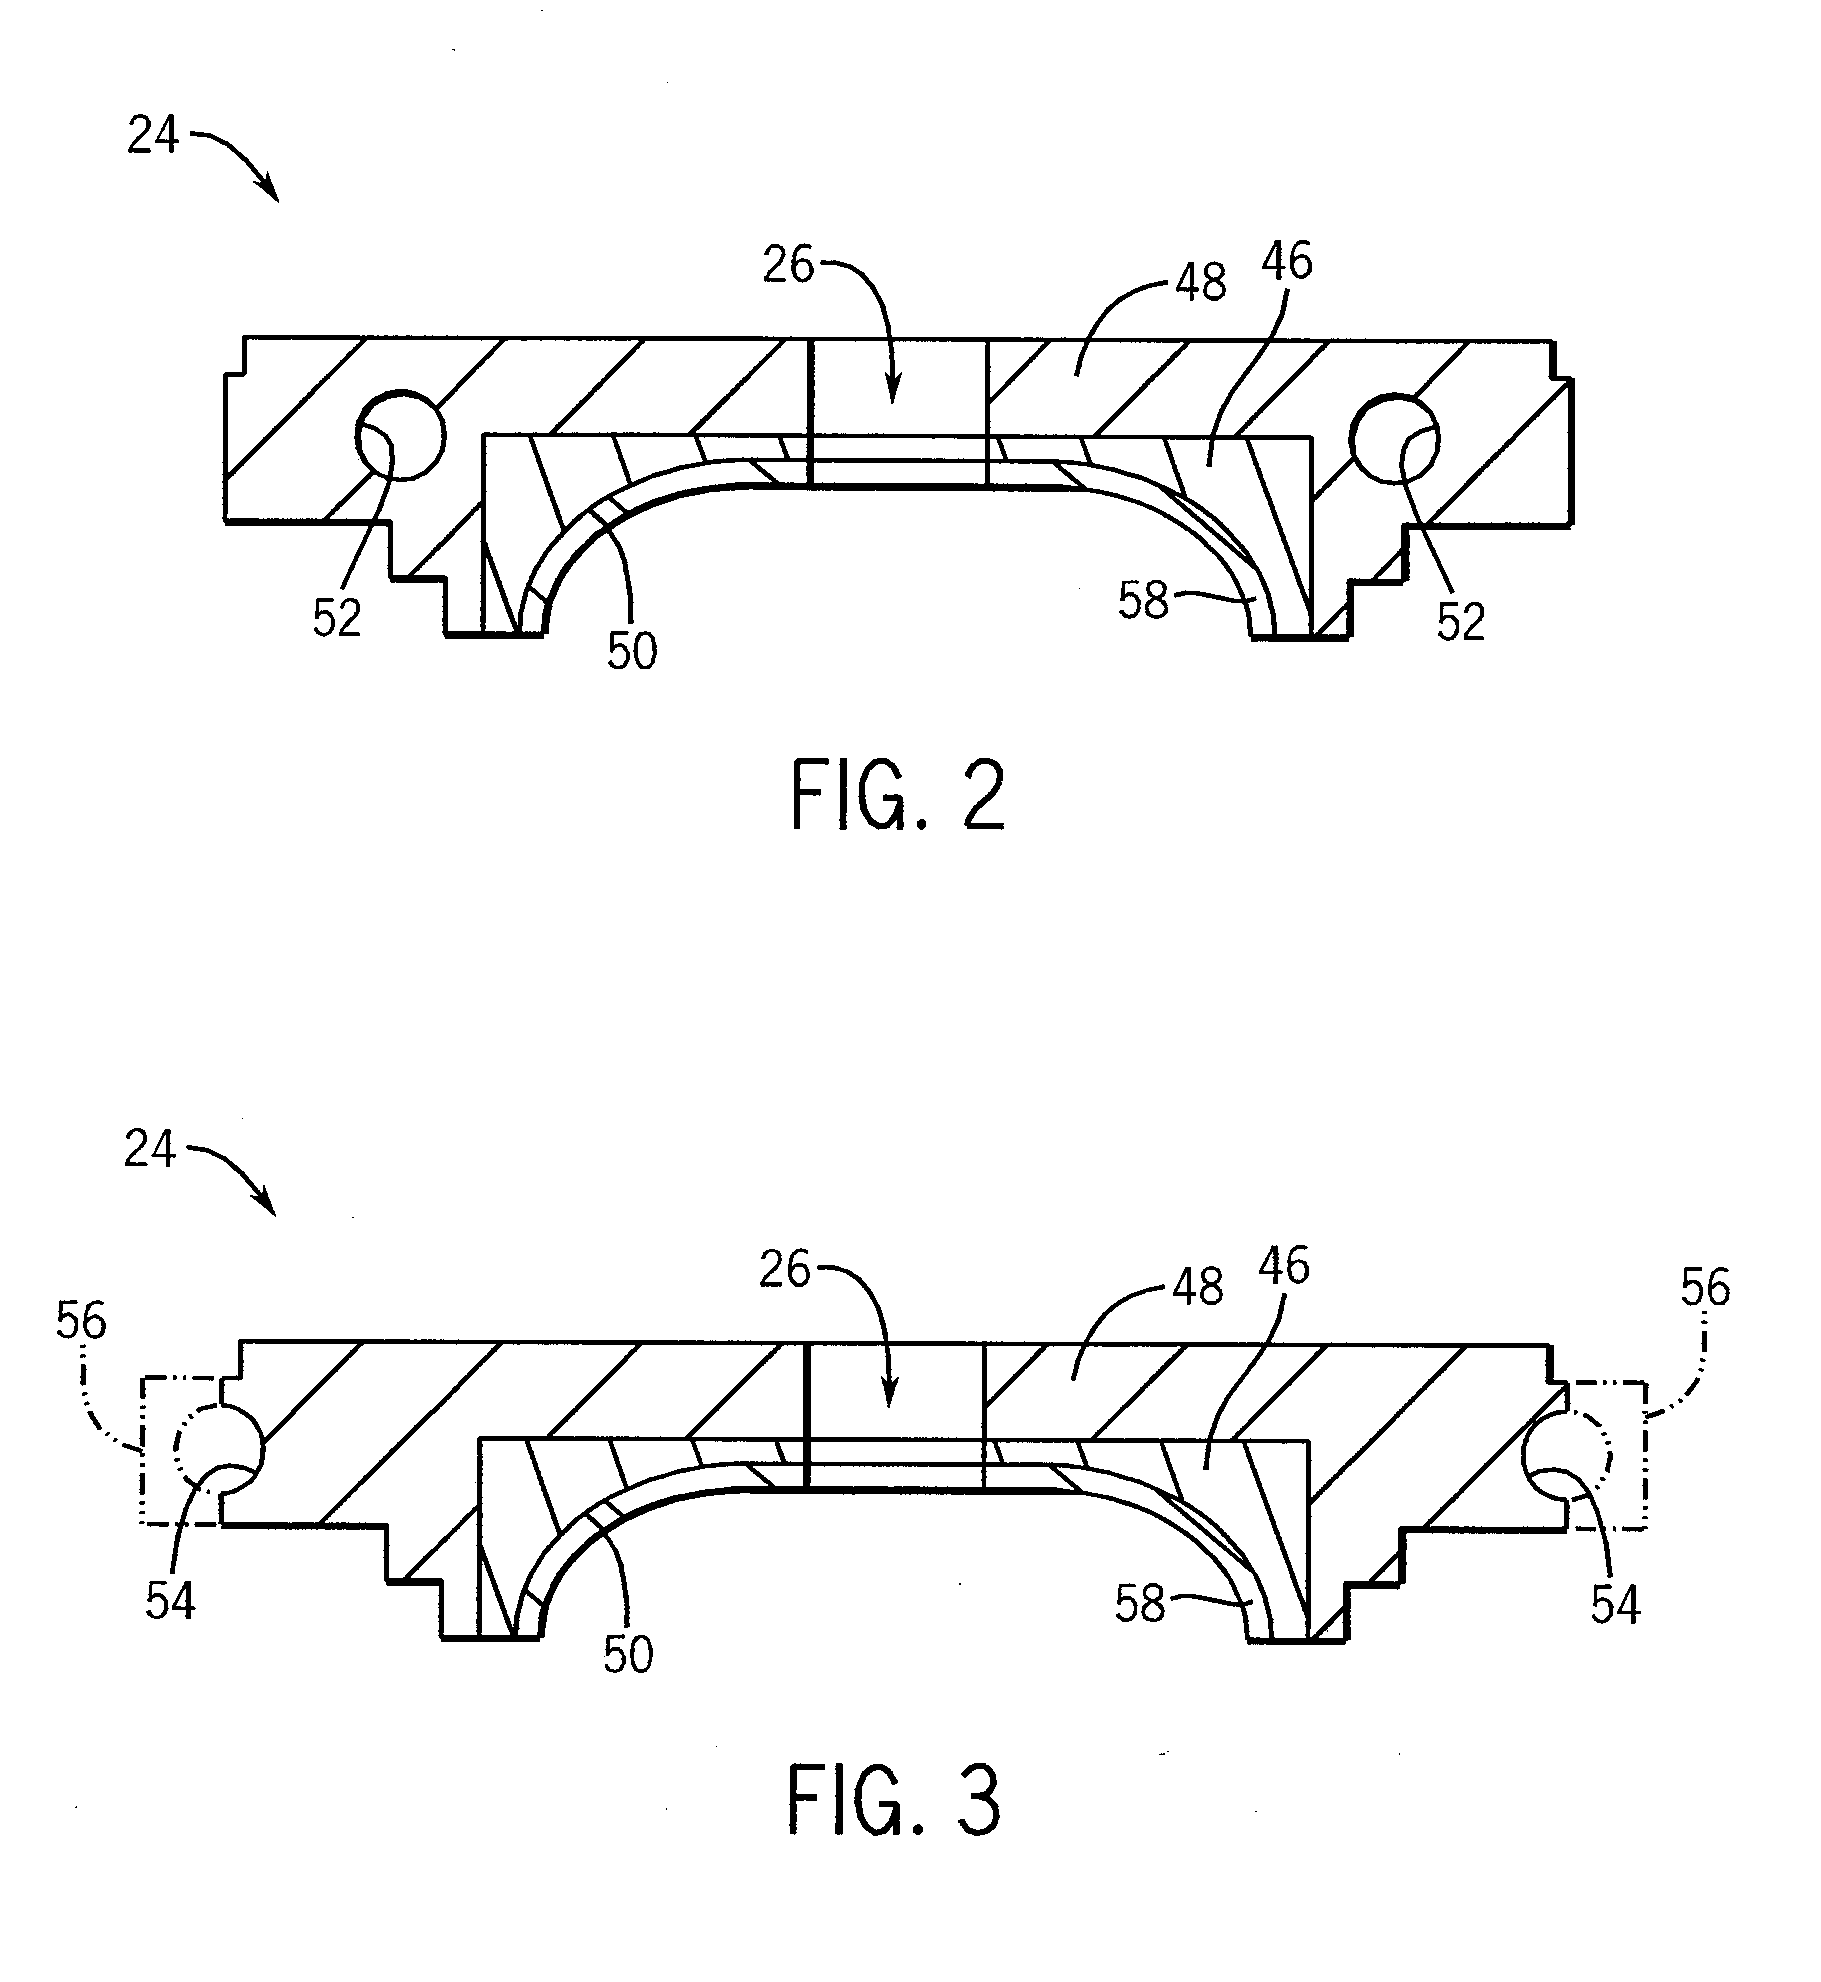 Shield assembly apparatus for an x-ray device